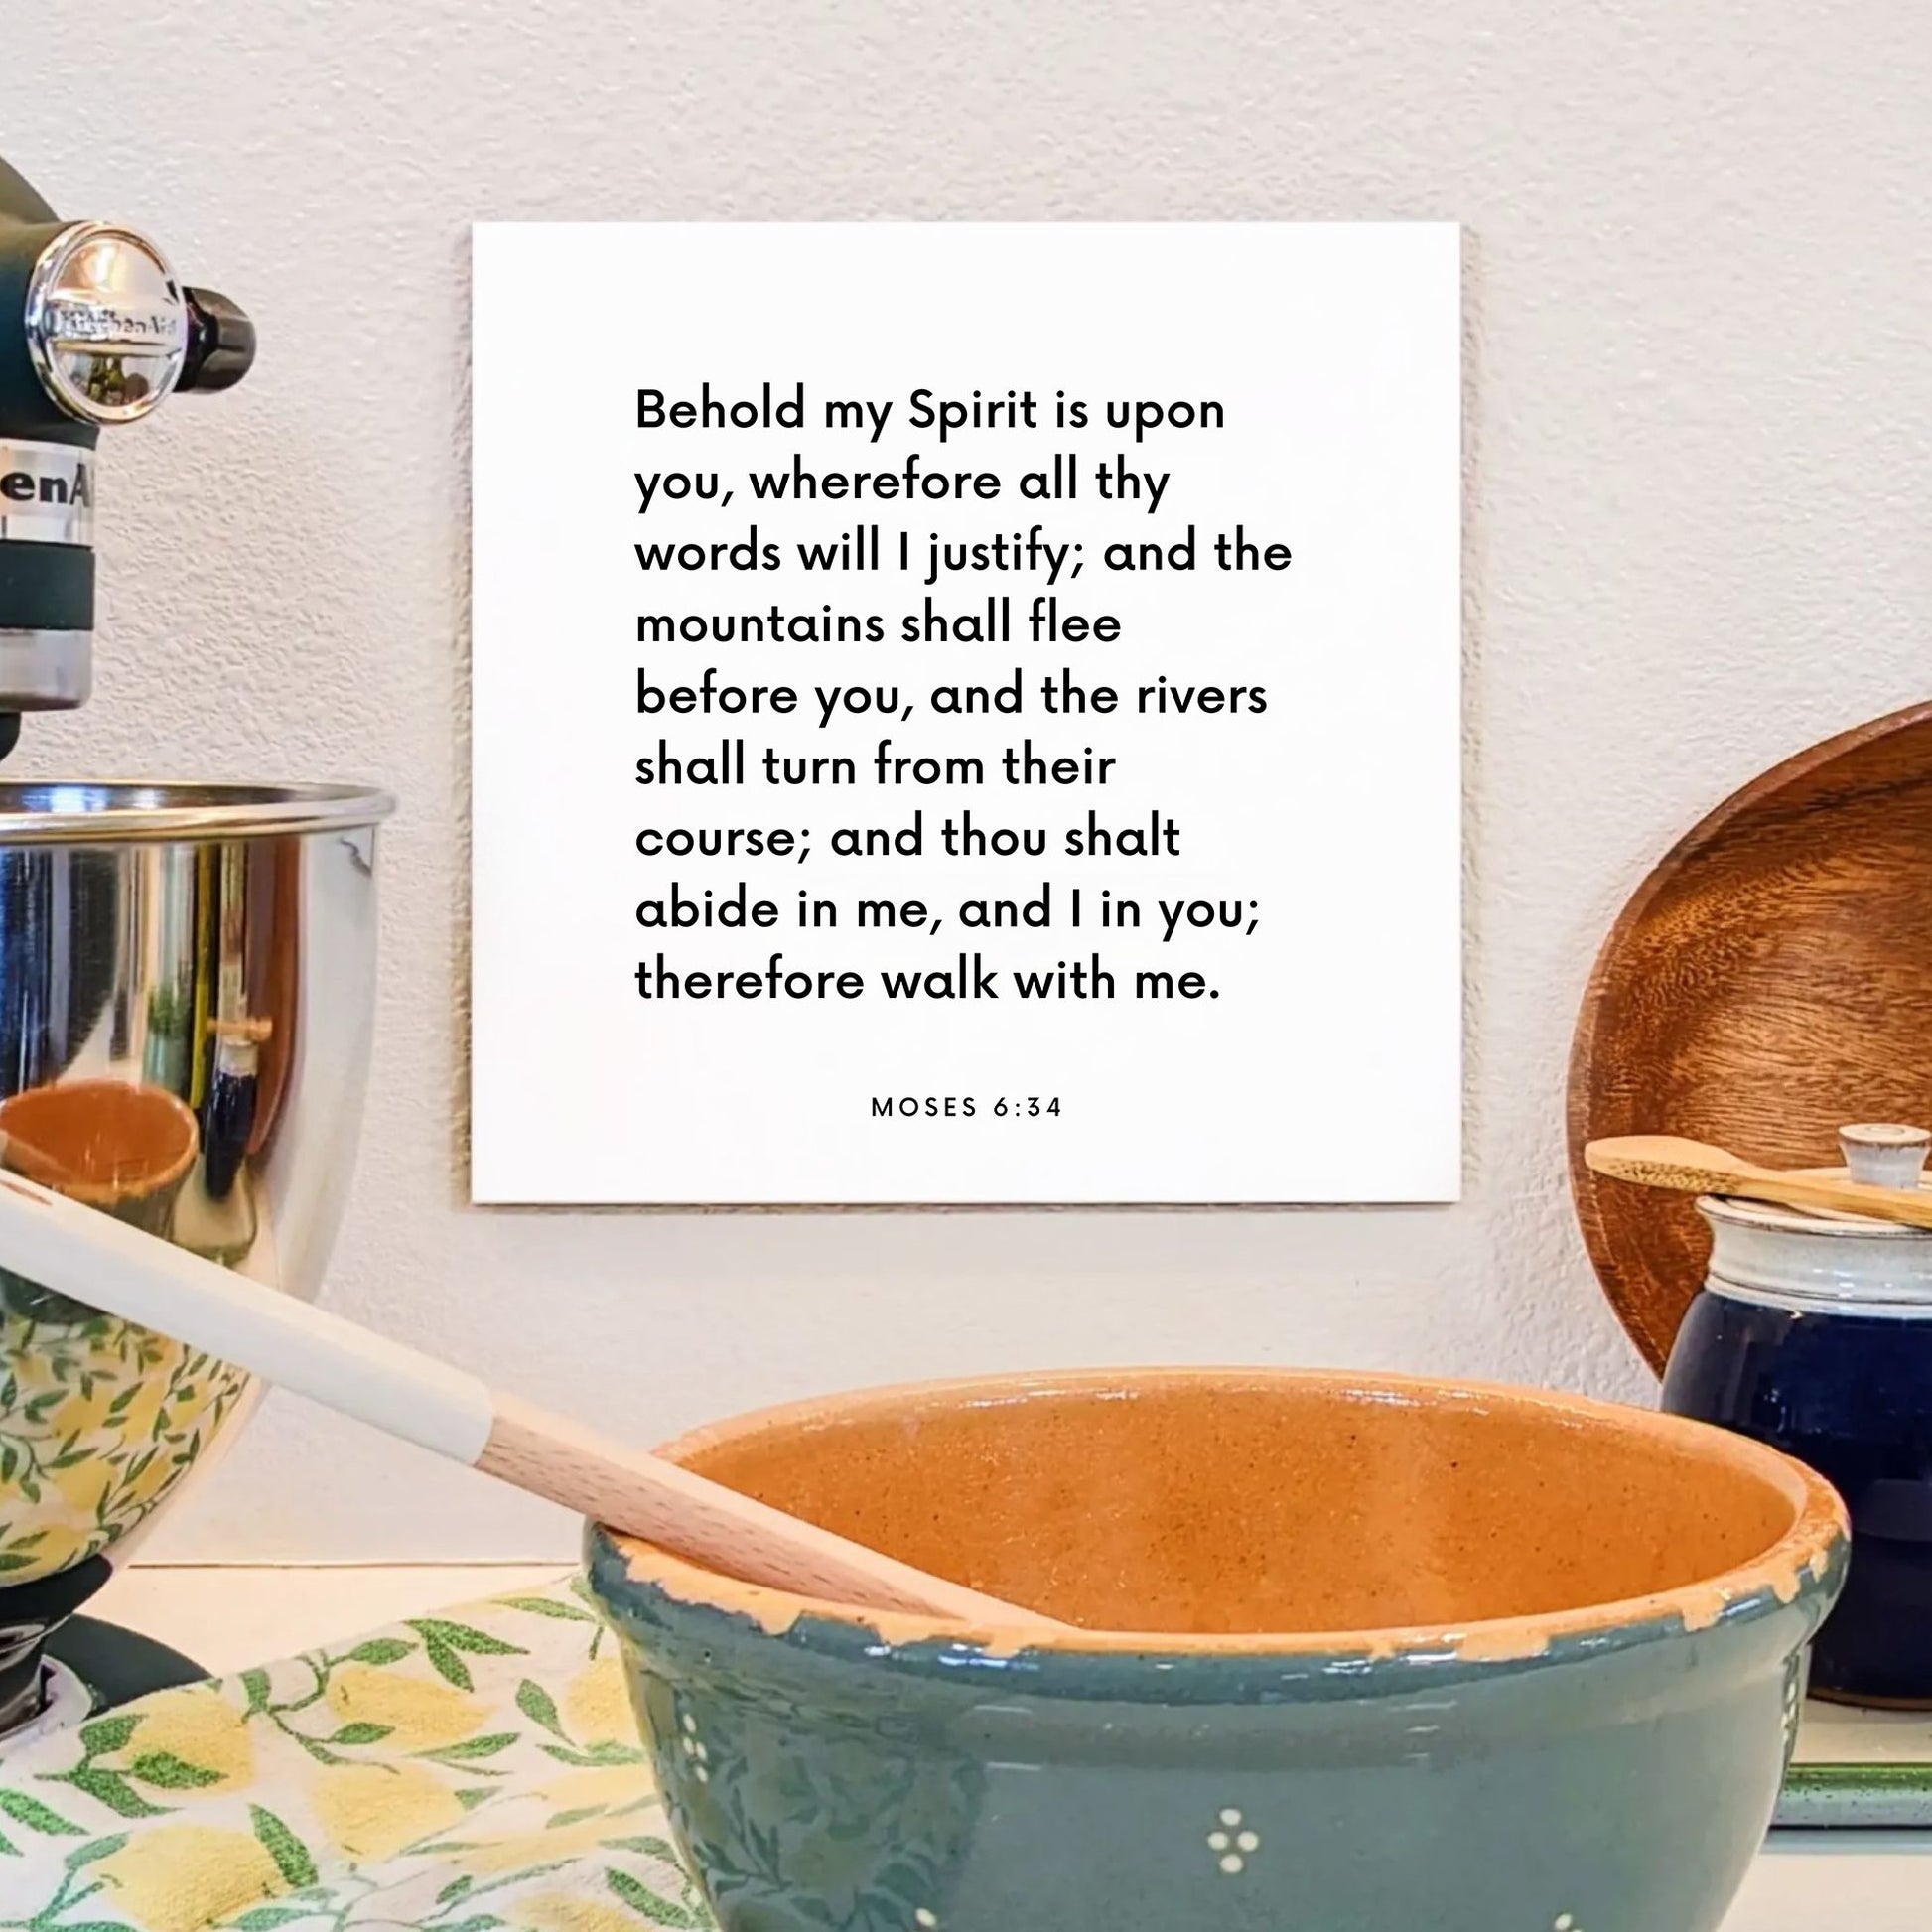 Kitchen mouting of the scripture tile for Moses 6:34 - "Thou shalt abide in me, and I in you"